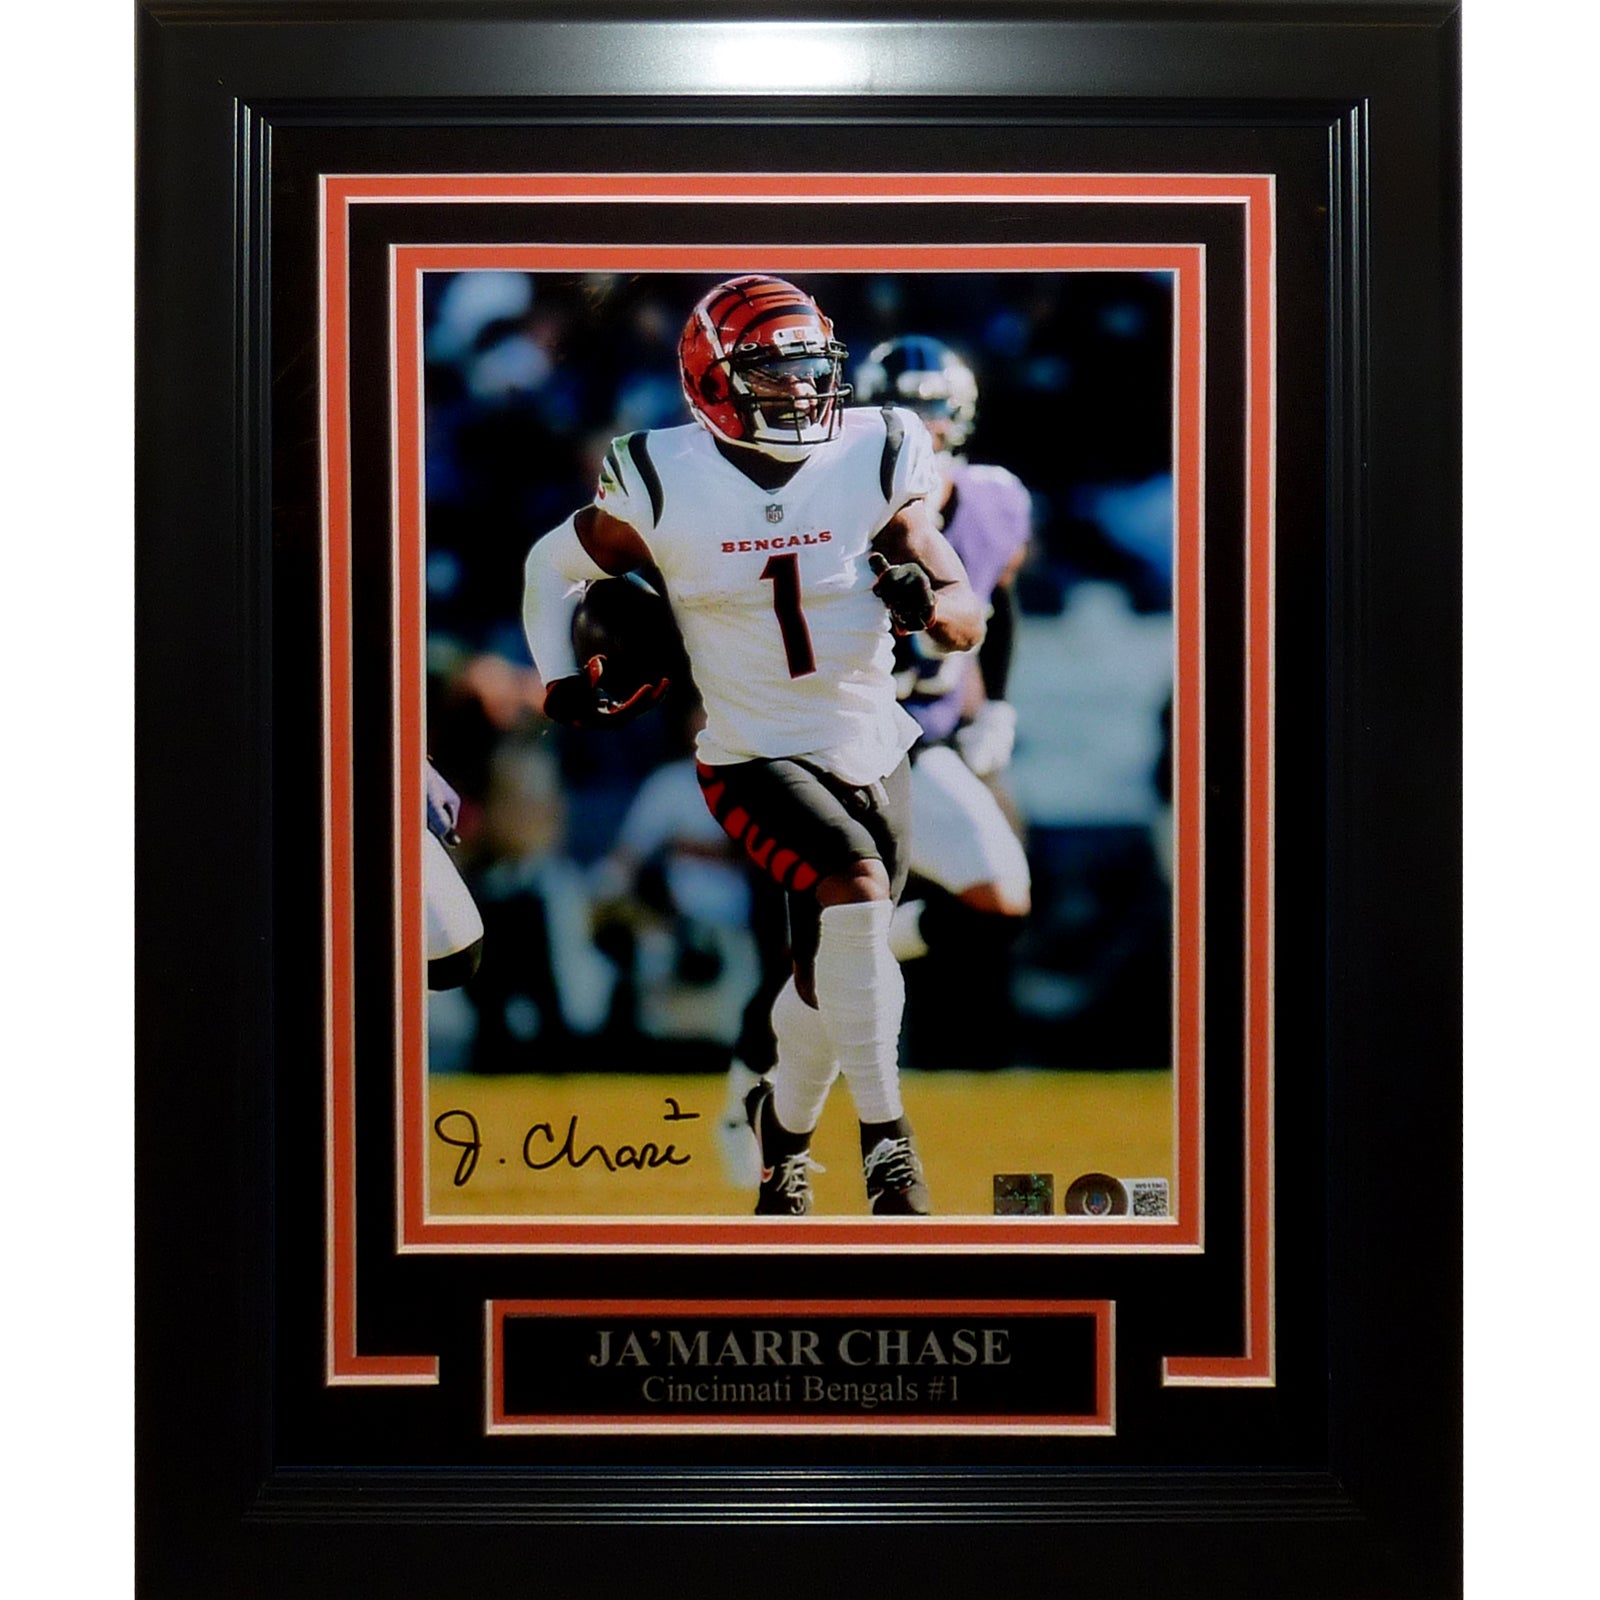 Ja'Marr Chase Autographed Cincinnati Bengals (White Jersey) Deluxe Framed 8x10 Photo - Beckett